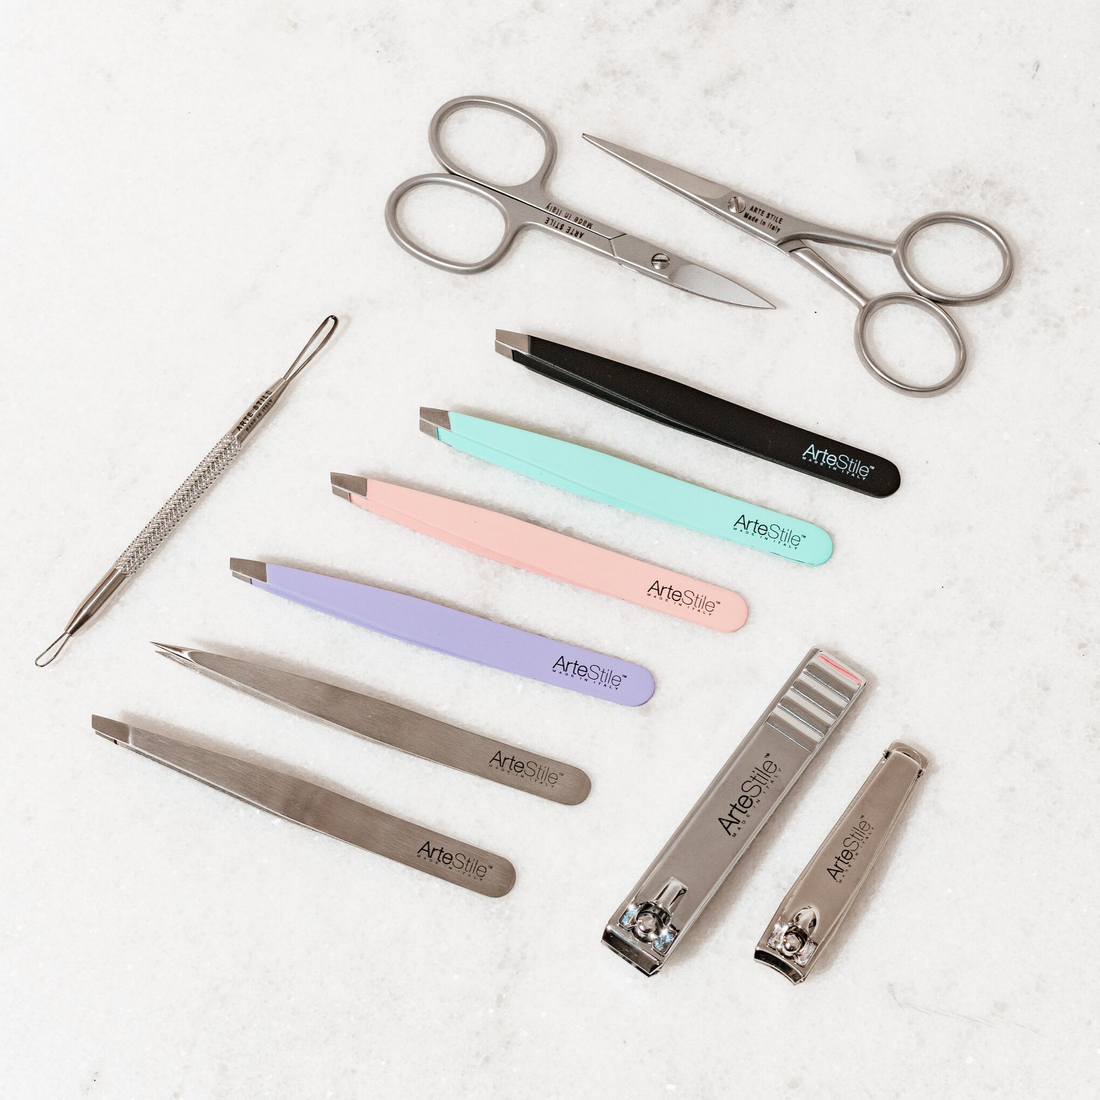 In Color Order: Wrapped Scissors Tutorial